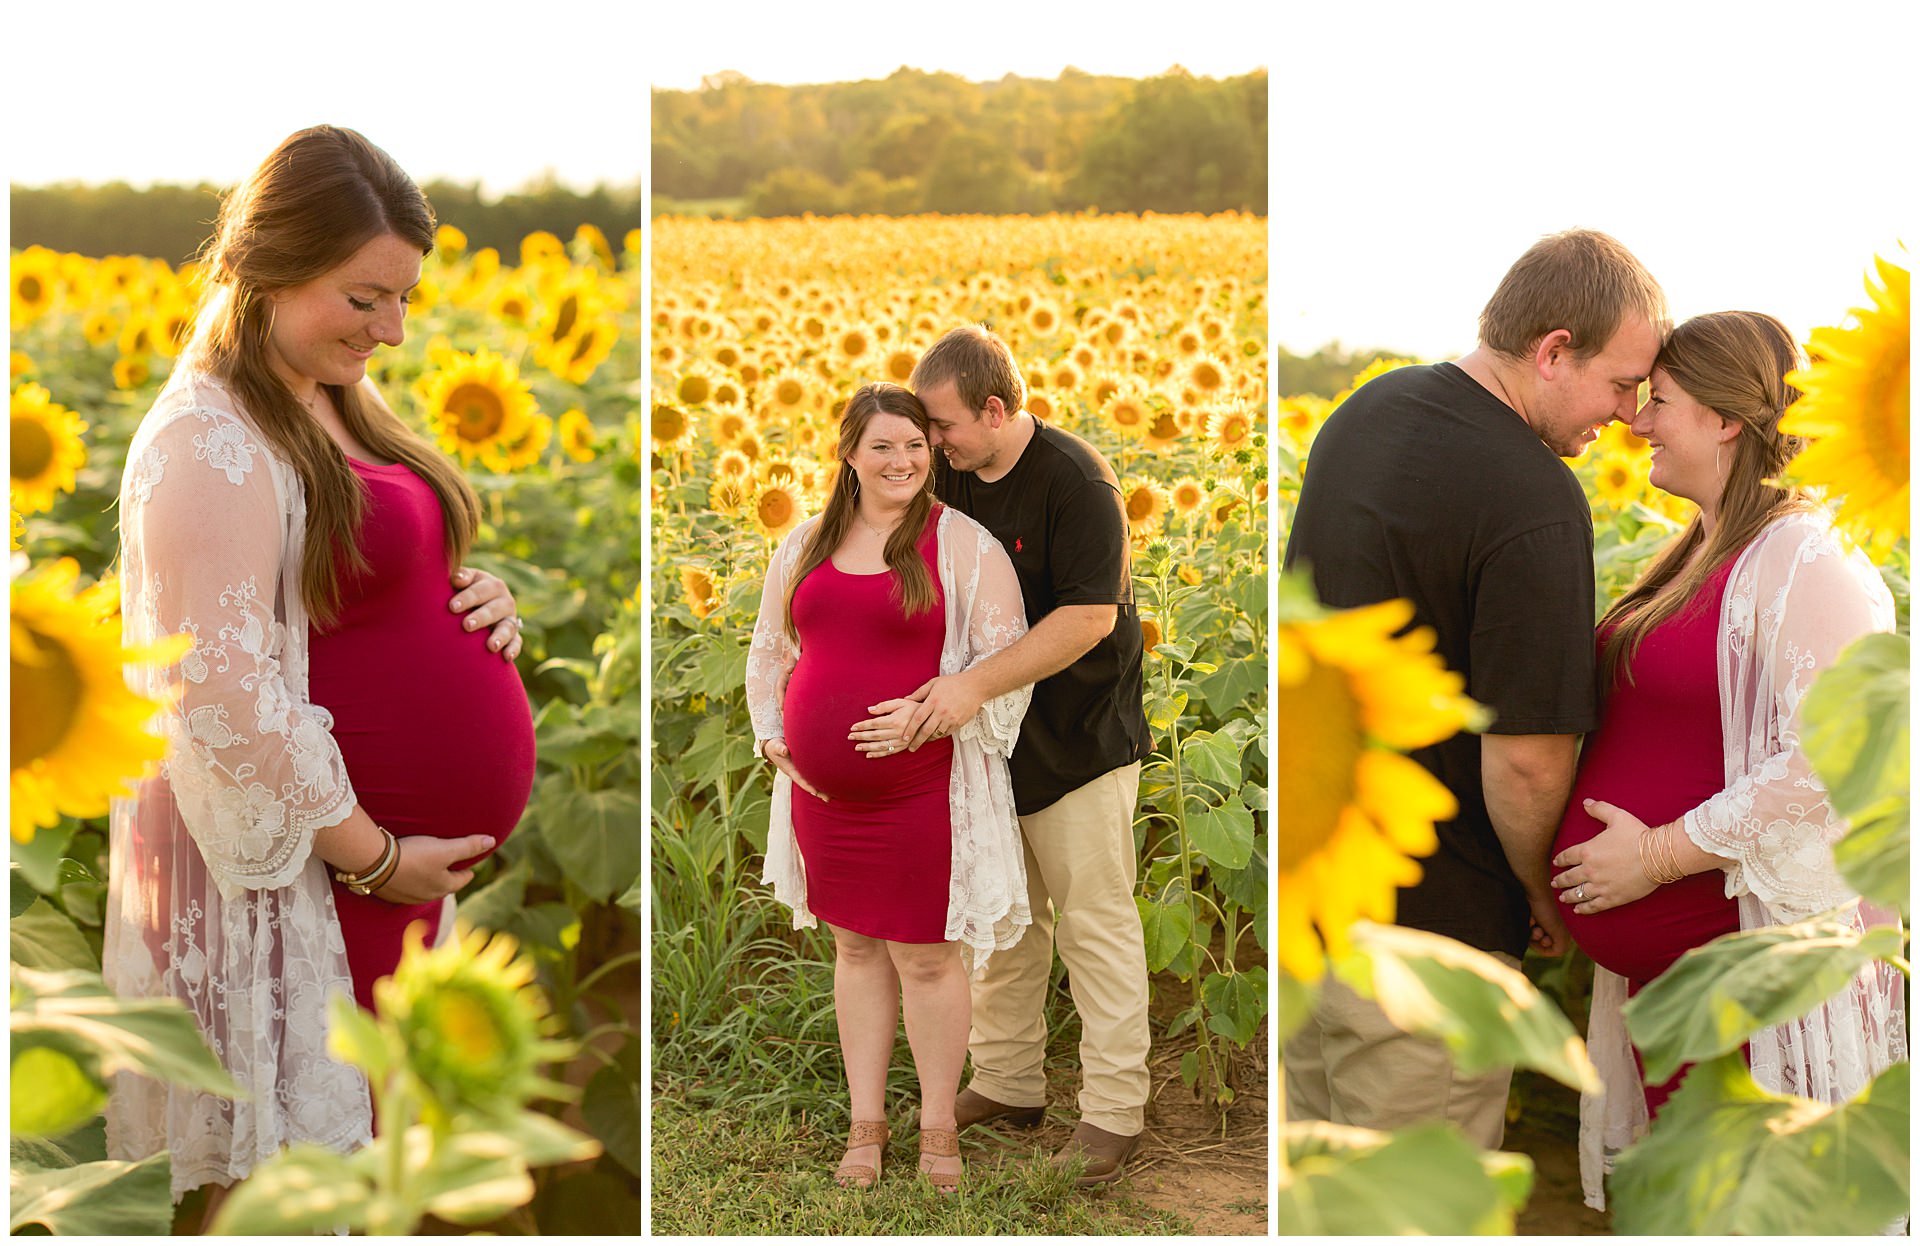 Maternity Session in a Sunflower Field at Evans Orchard in Georgetown, Kentucky